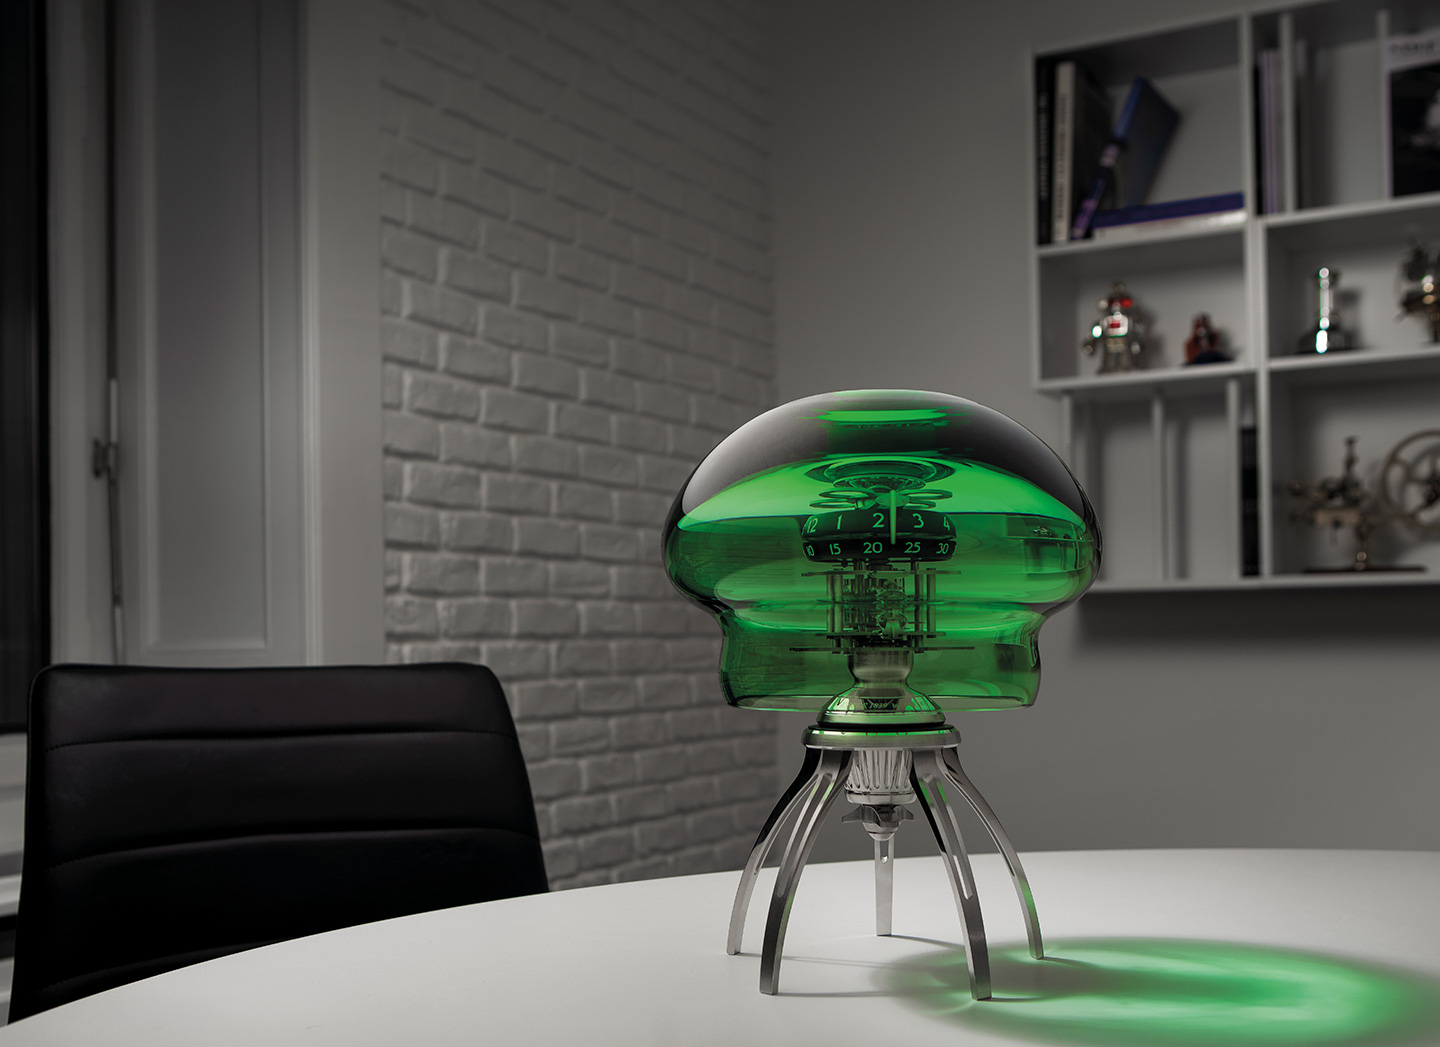 MB&F Medusa Clock made in cooperation with L'Epee